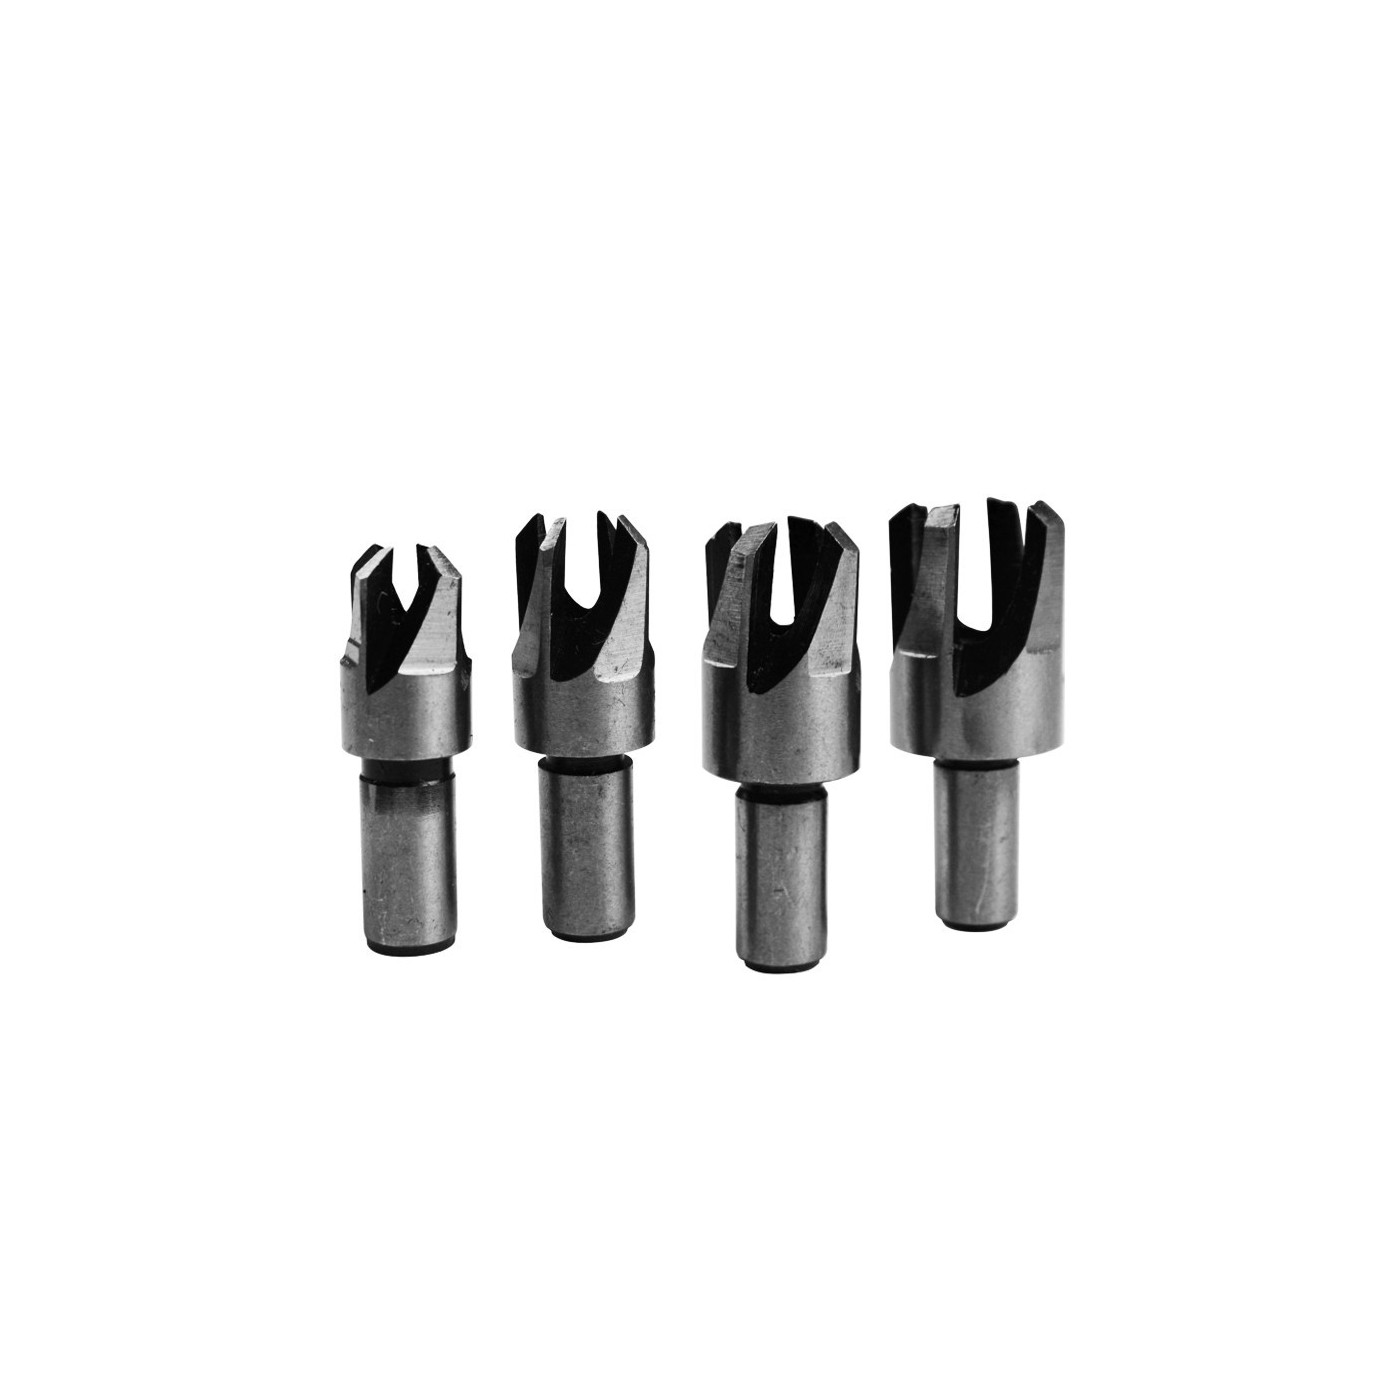 Set of plug drills for wood (4 pieces)